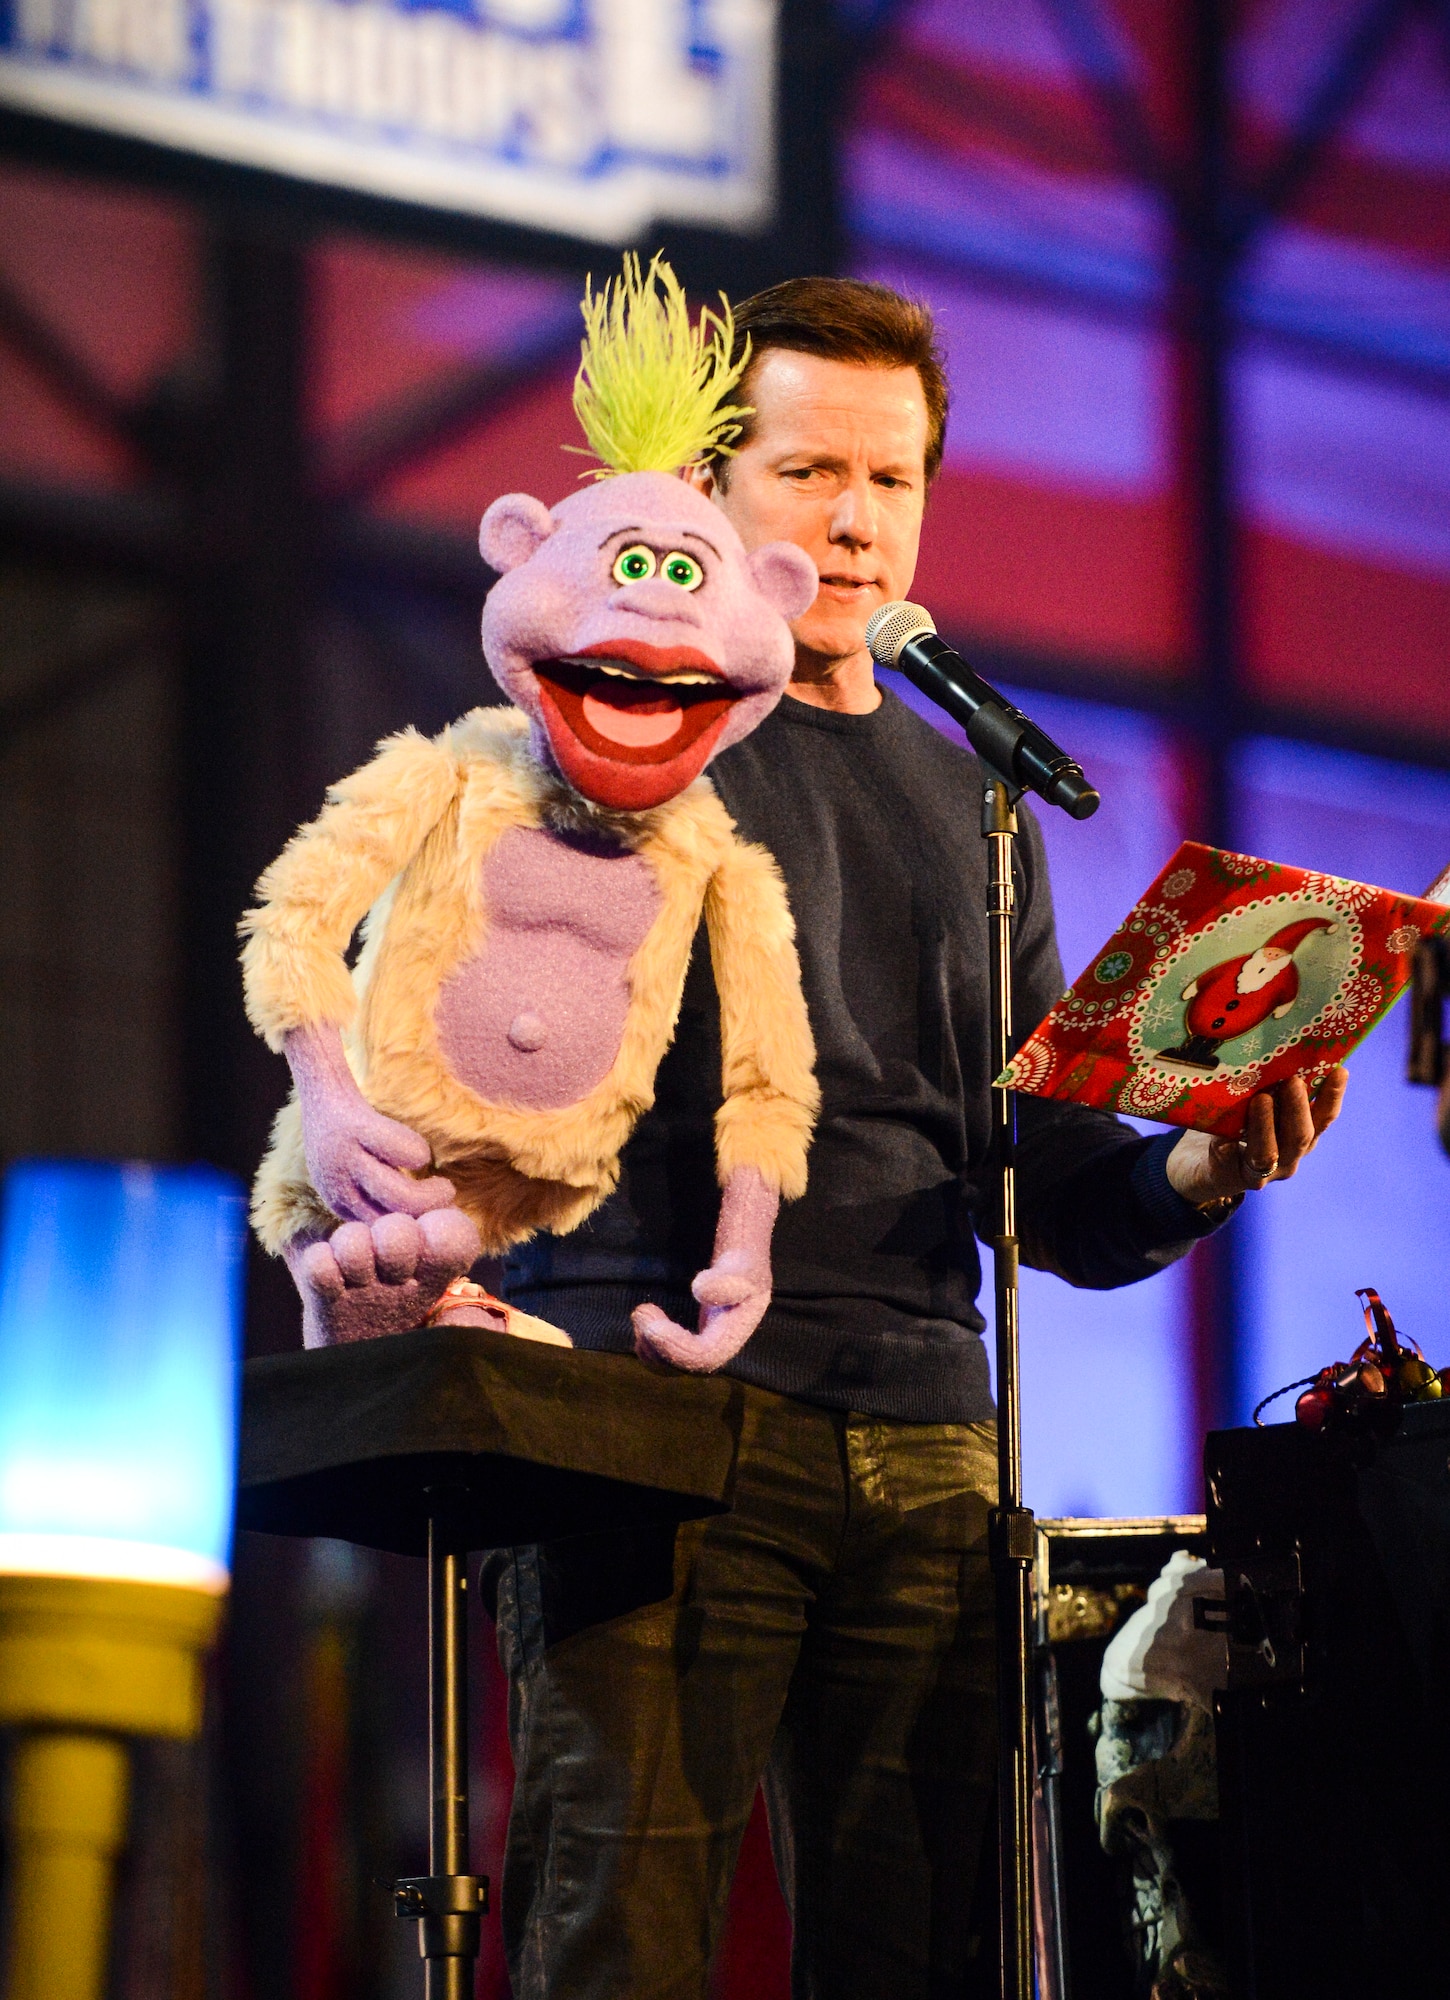 Comedian and ventriloquist Jeff Dunham and his sidekick, Peanut, perform for service members and family members, Dec. 11, 2013, at Joint Base Lewis-McChord, Wash. Dunham's performance was part of the WWE Tribute to the Troops event which entertained approximately 4,000 people. (U.S. Air Force photo/Tech. Sgt. Tobin)